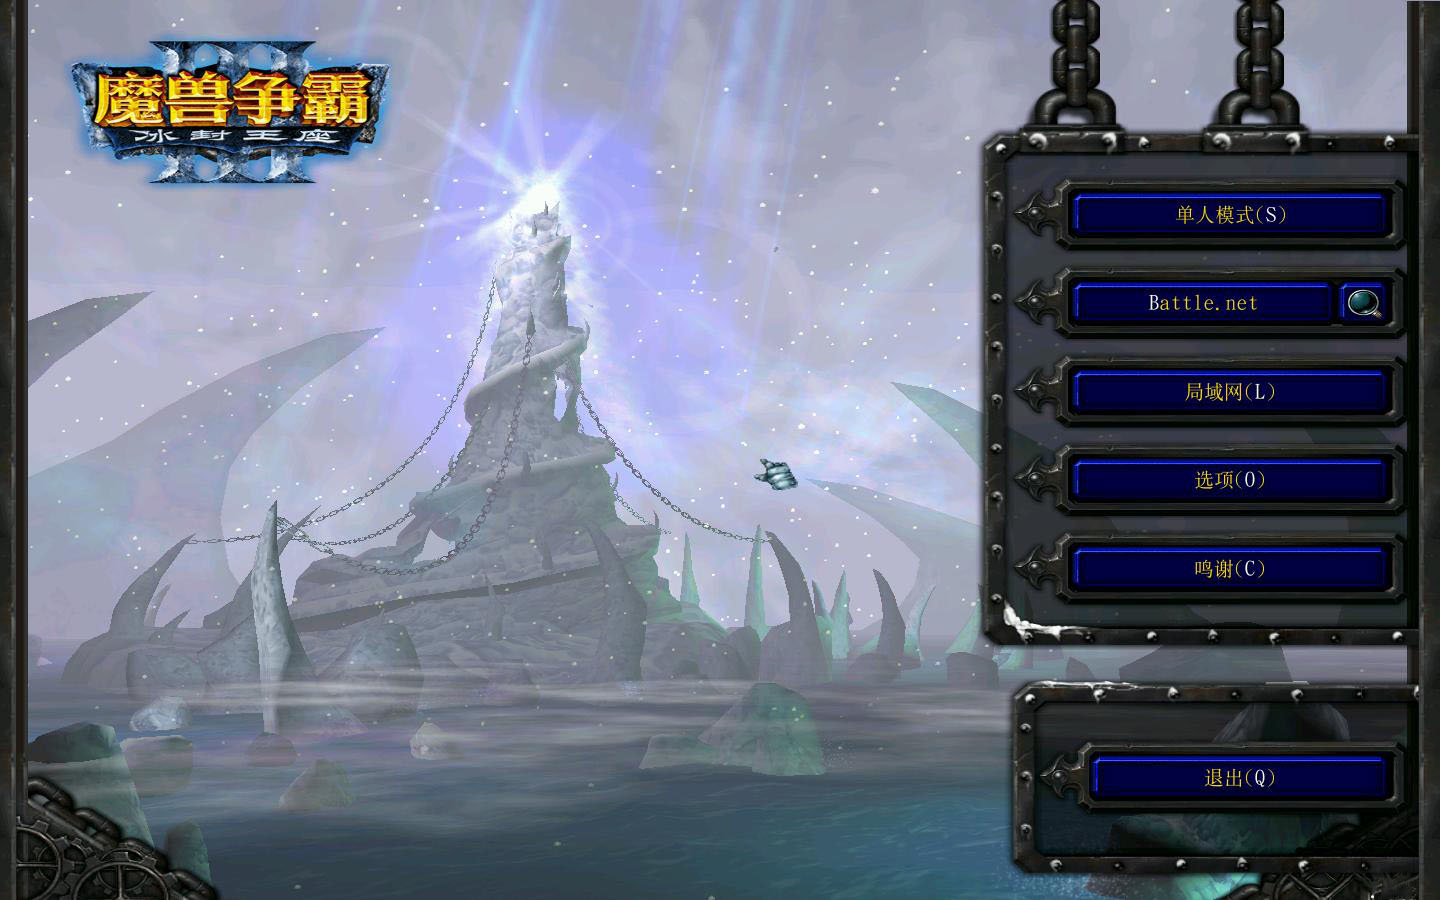 ħ3Warcraft III The Frozen Thronev1.20-1.27κ3C v5.563.2